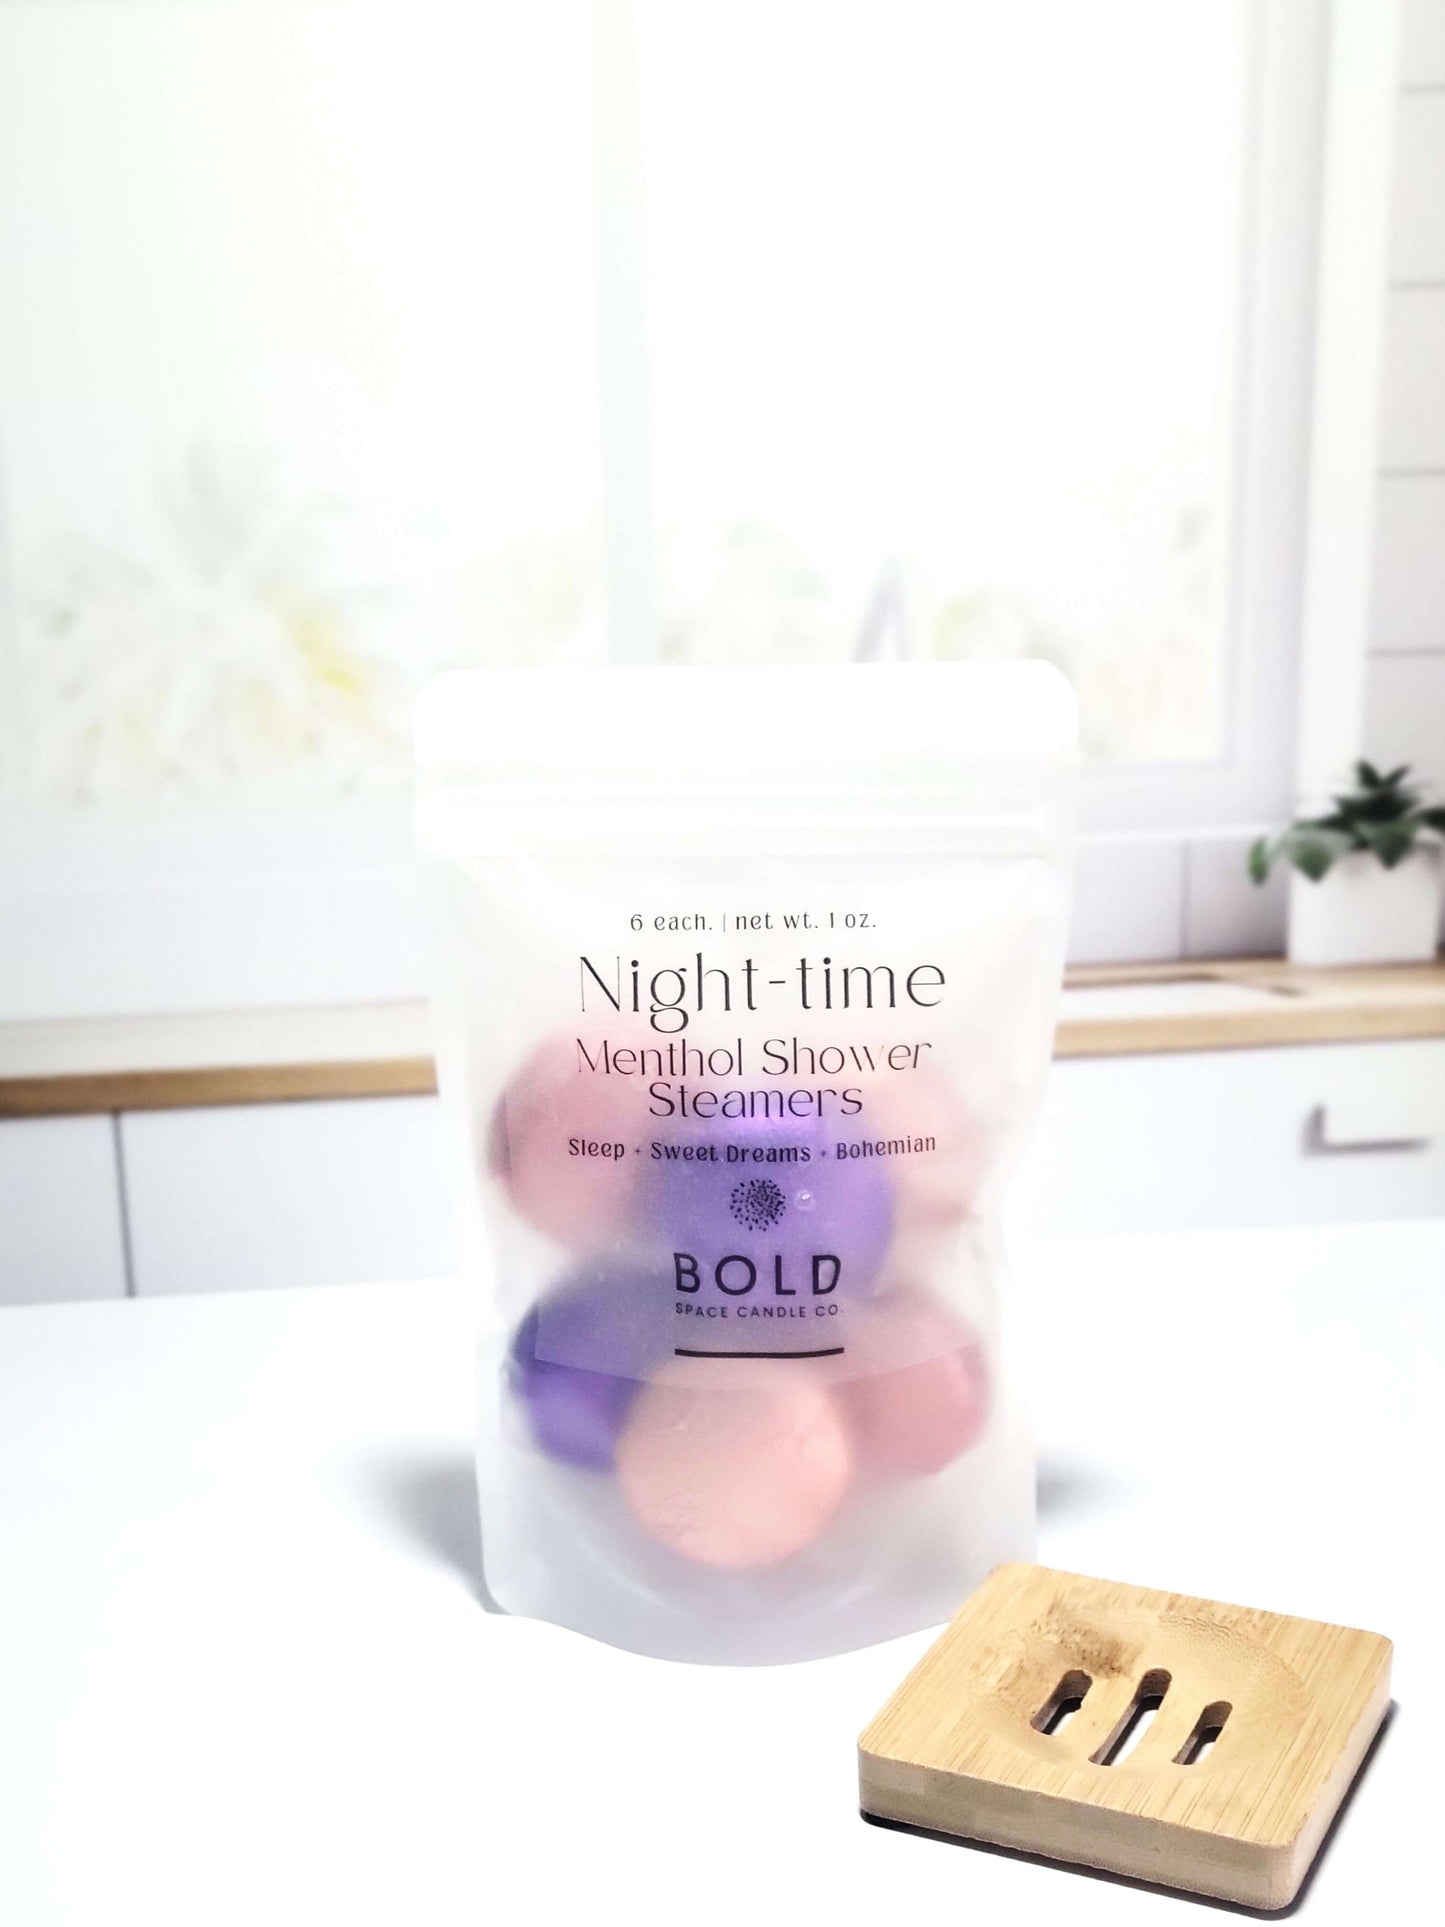 Night-Time - Menthol Shower Steamers